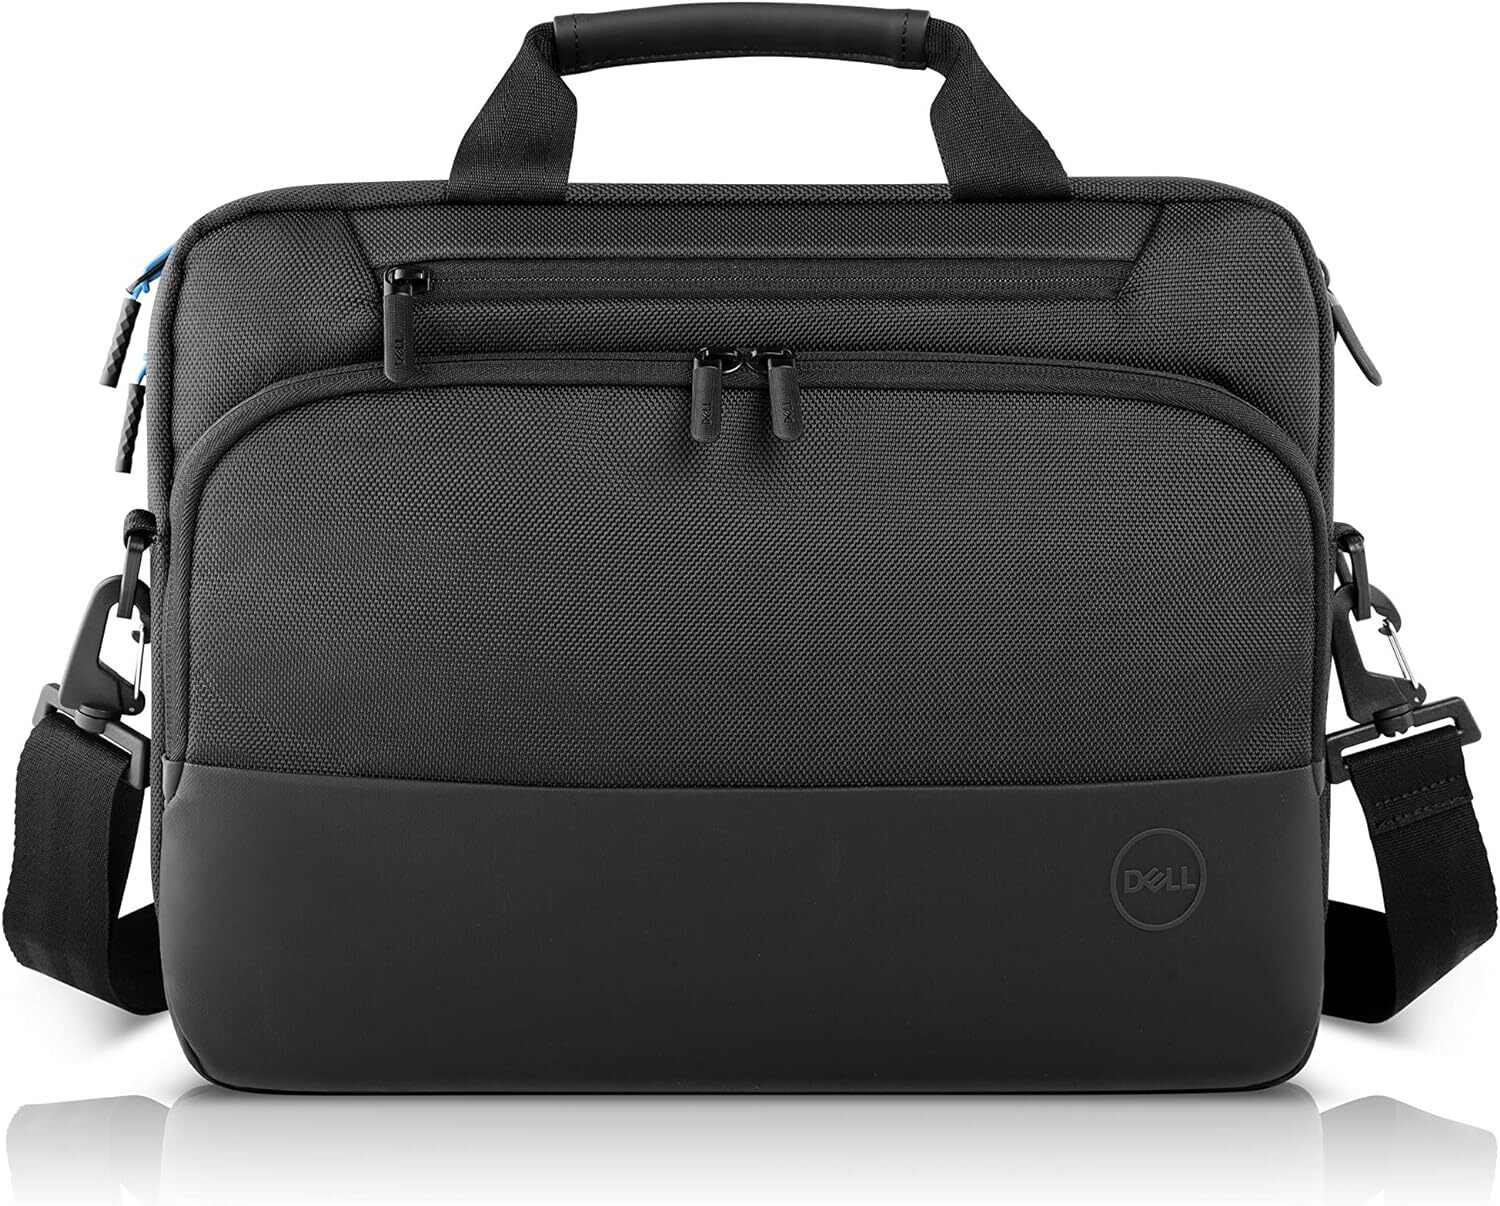 Dell Pro Briefcase 14 Laptop Bag for 14" Laptops PO-BC-14-20 - New, Open Box Full Size Image